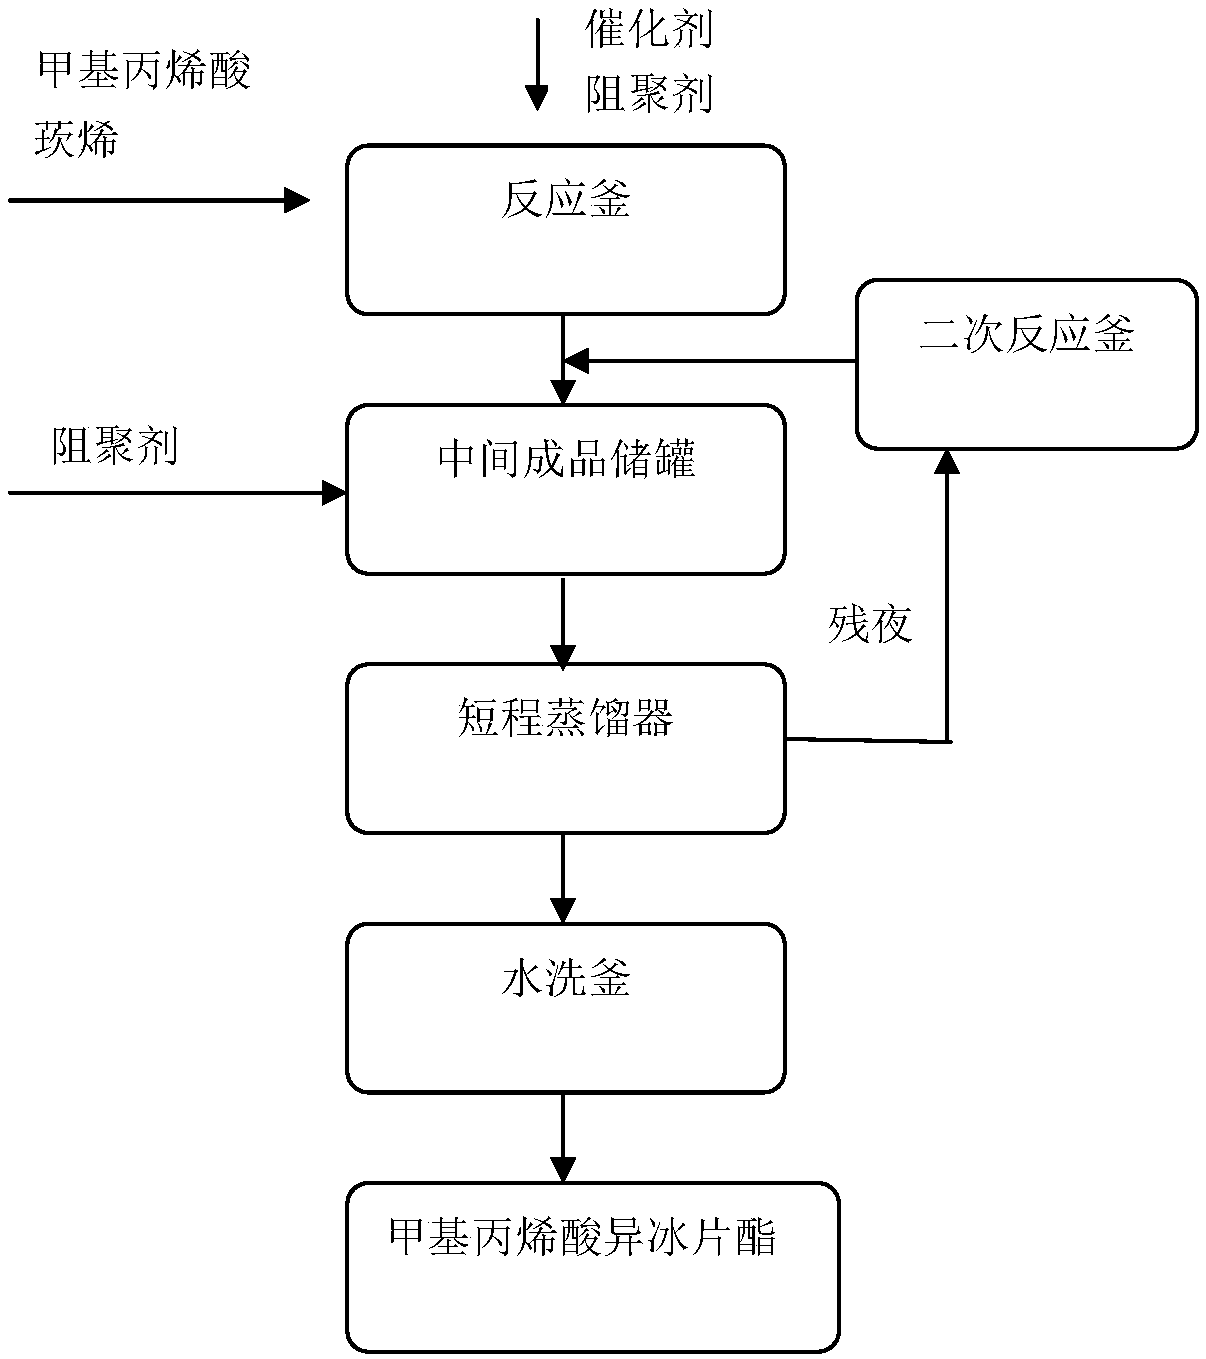 Continuous production method for isobornyl methacrylate